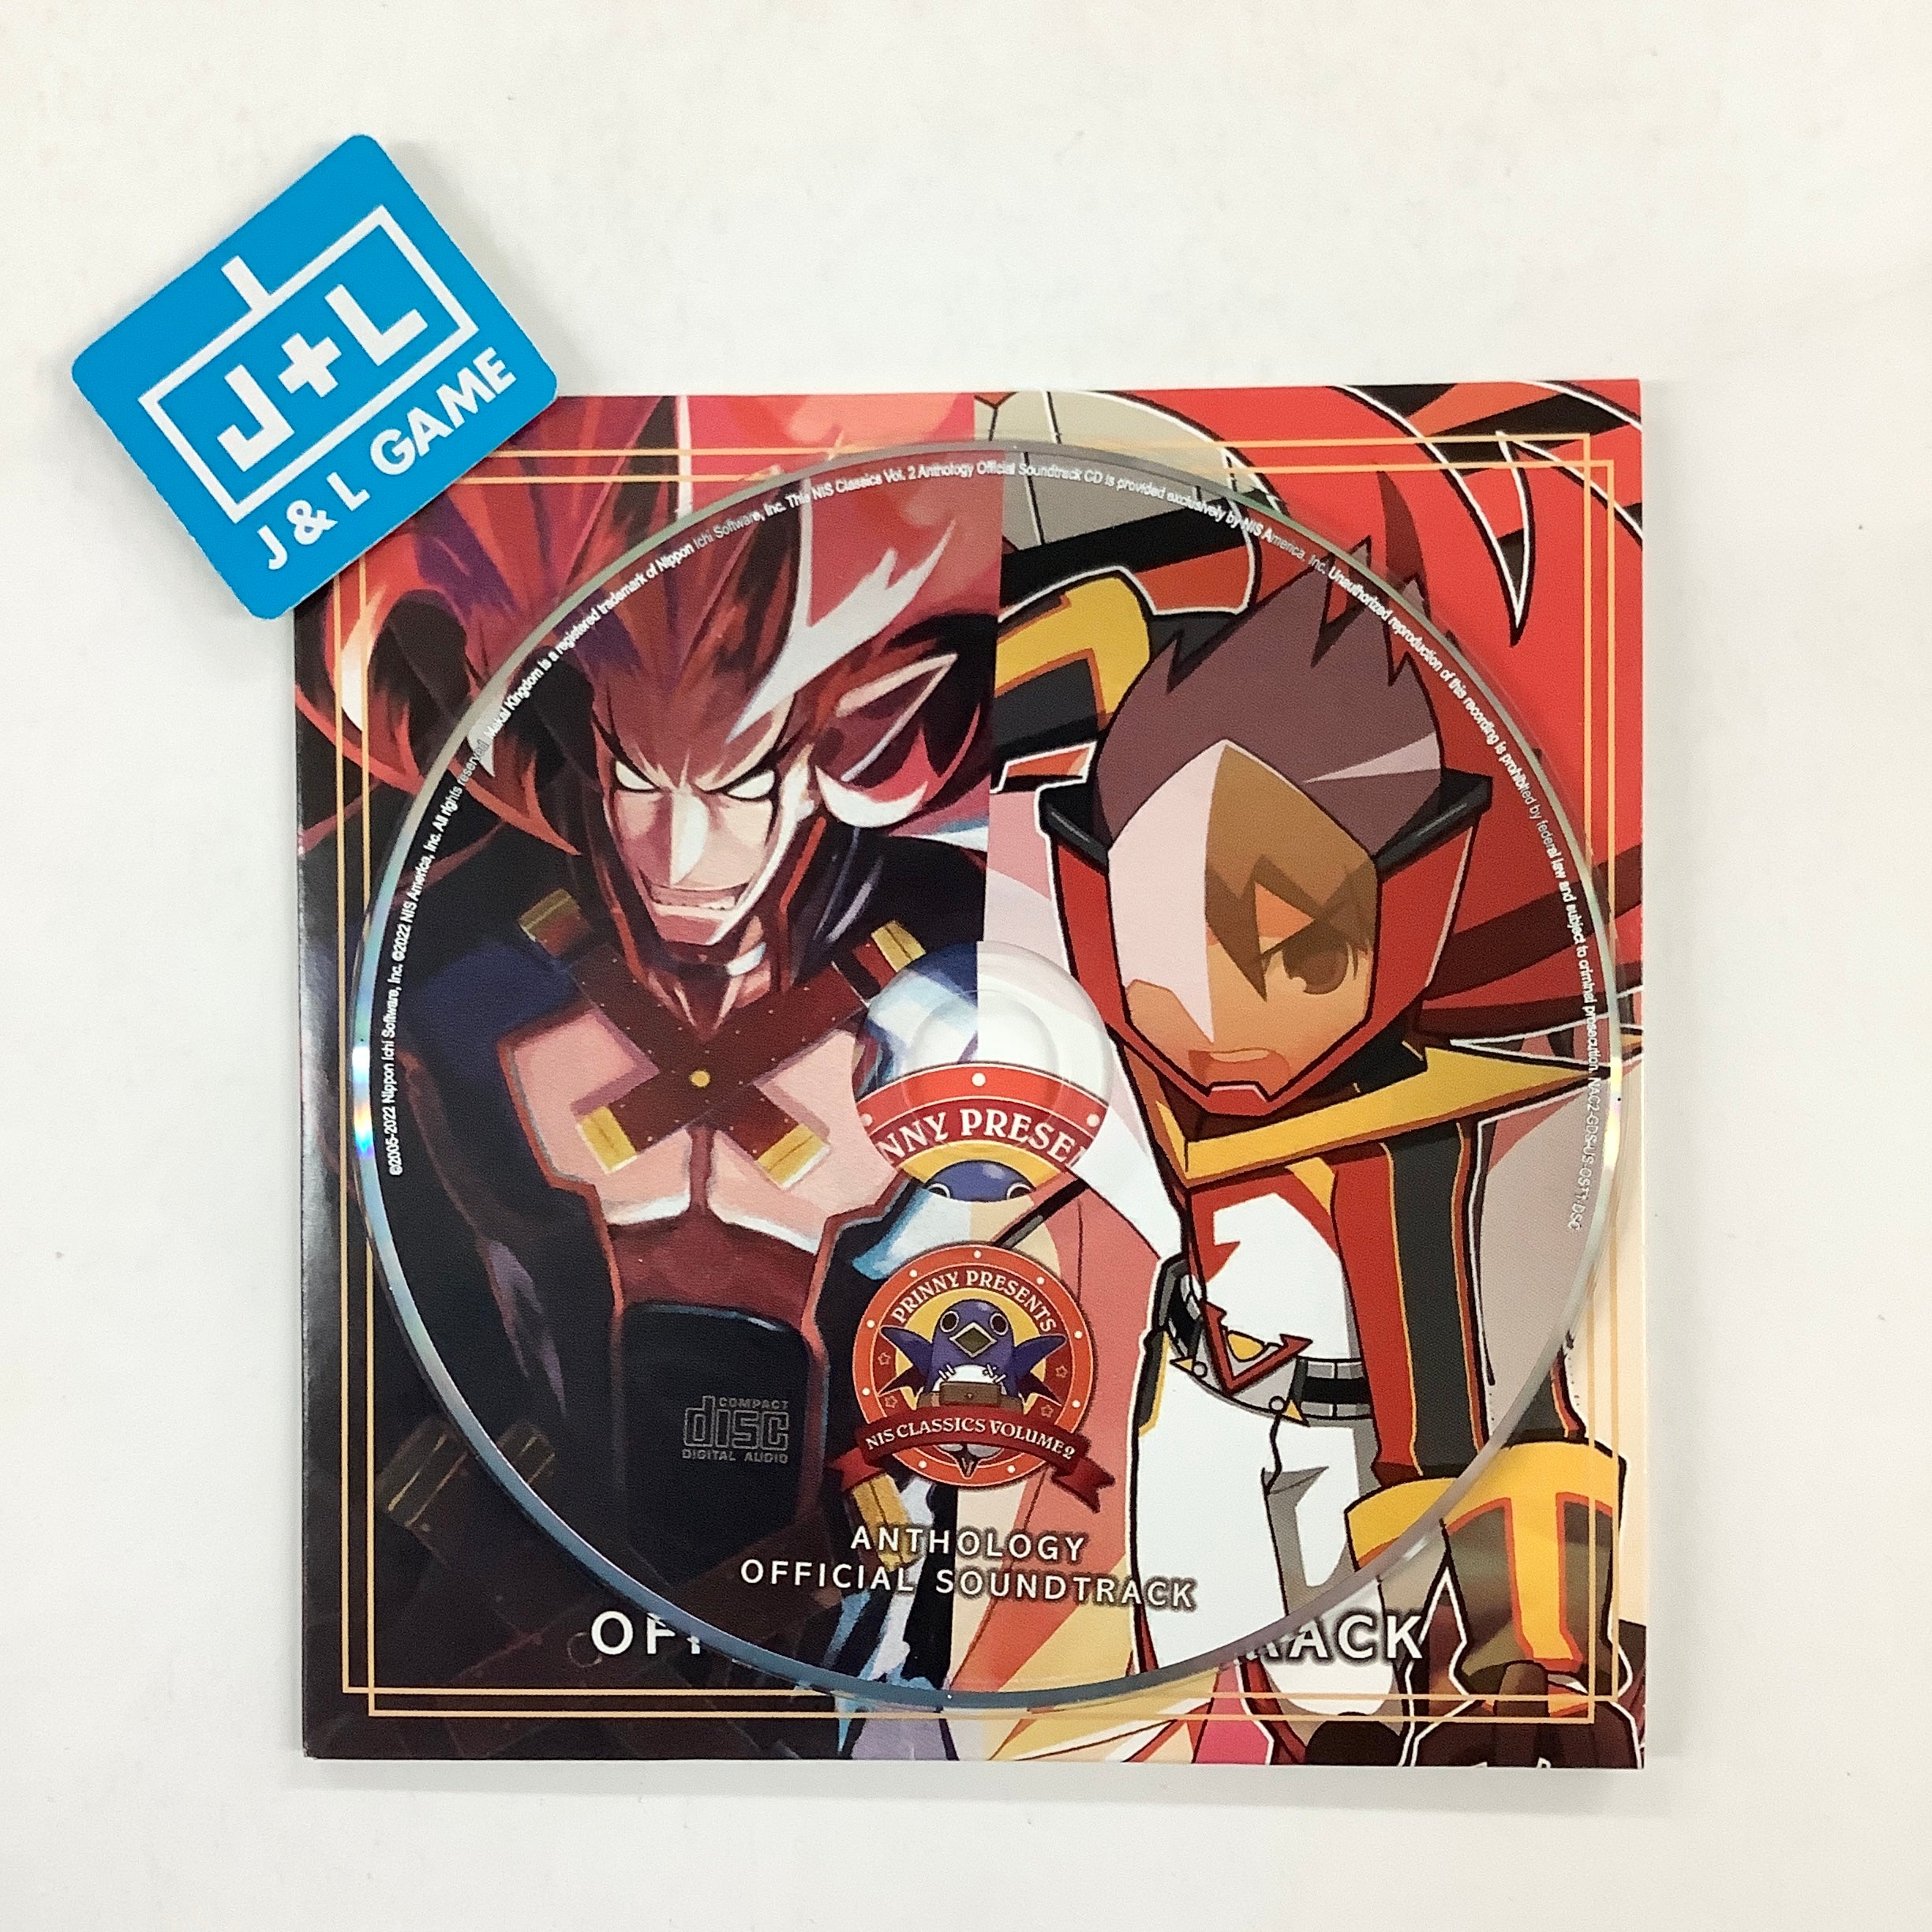 Prinny Presents NIS Classics Volume 2: Makai Kingdom: Reclaimed and Rebound / ZHP: Unlosing Ranger vs. Darkdeath Evilman Deluxe Edition - (NSW) Nintendo Switch [UNBOXING] Video Games NIS America   